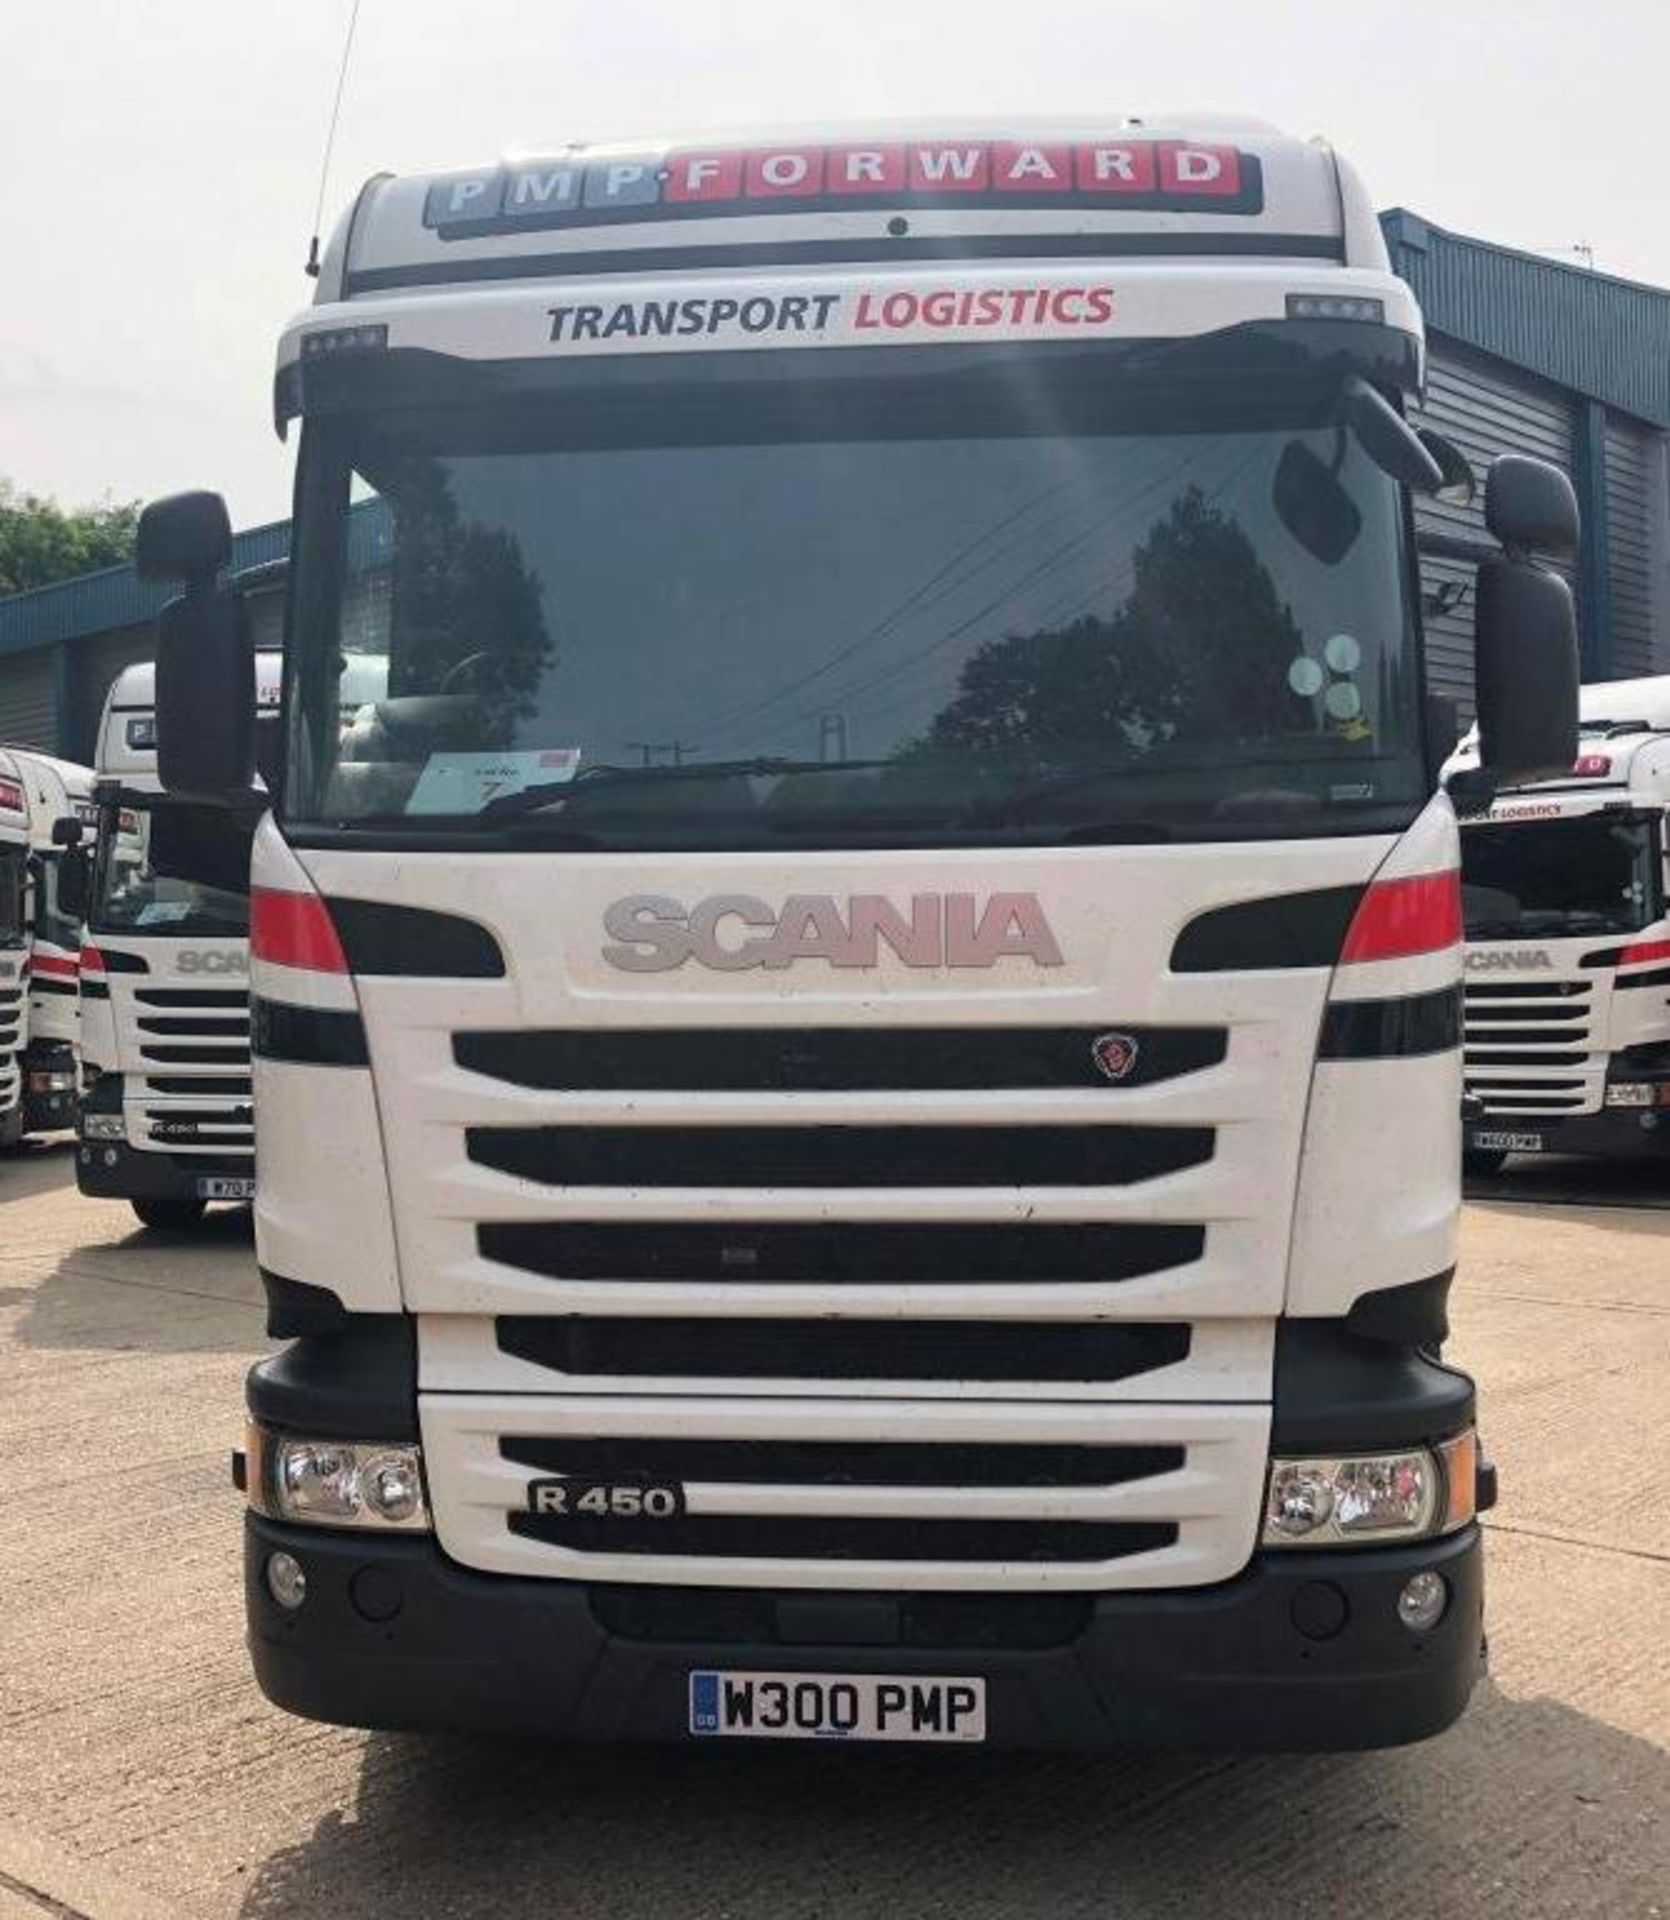 Scania R450 LA 6X2/2MNA High Line tractor unit, 2 Pedal Opticruise Gearbox, Registration number